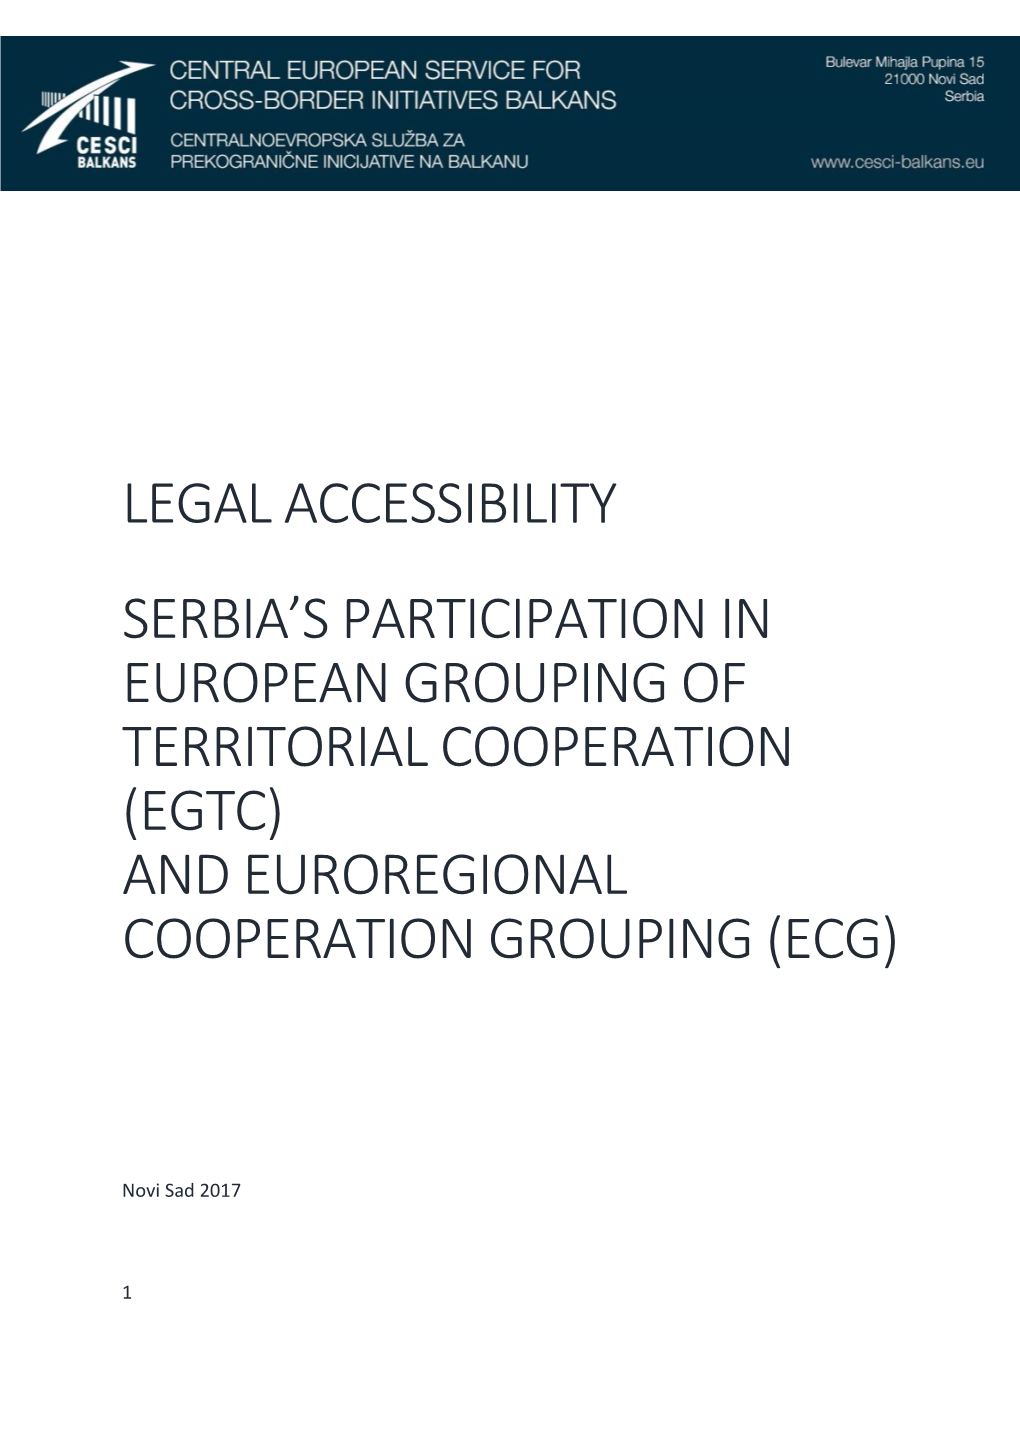 Legal Accessibility Serbia's Participation in European Grouping of Territorial Cooperation (Egtc) and Euroregional Cooperat